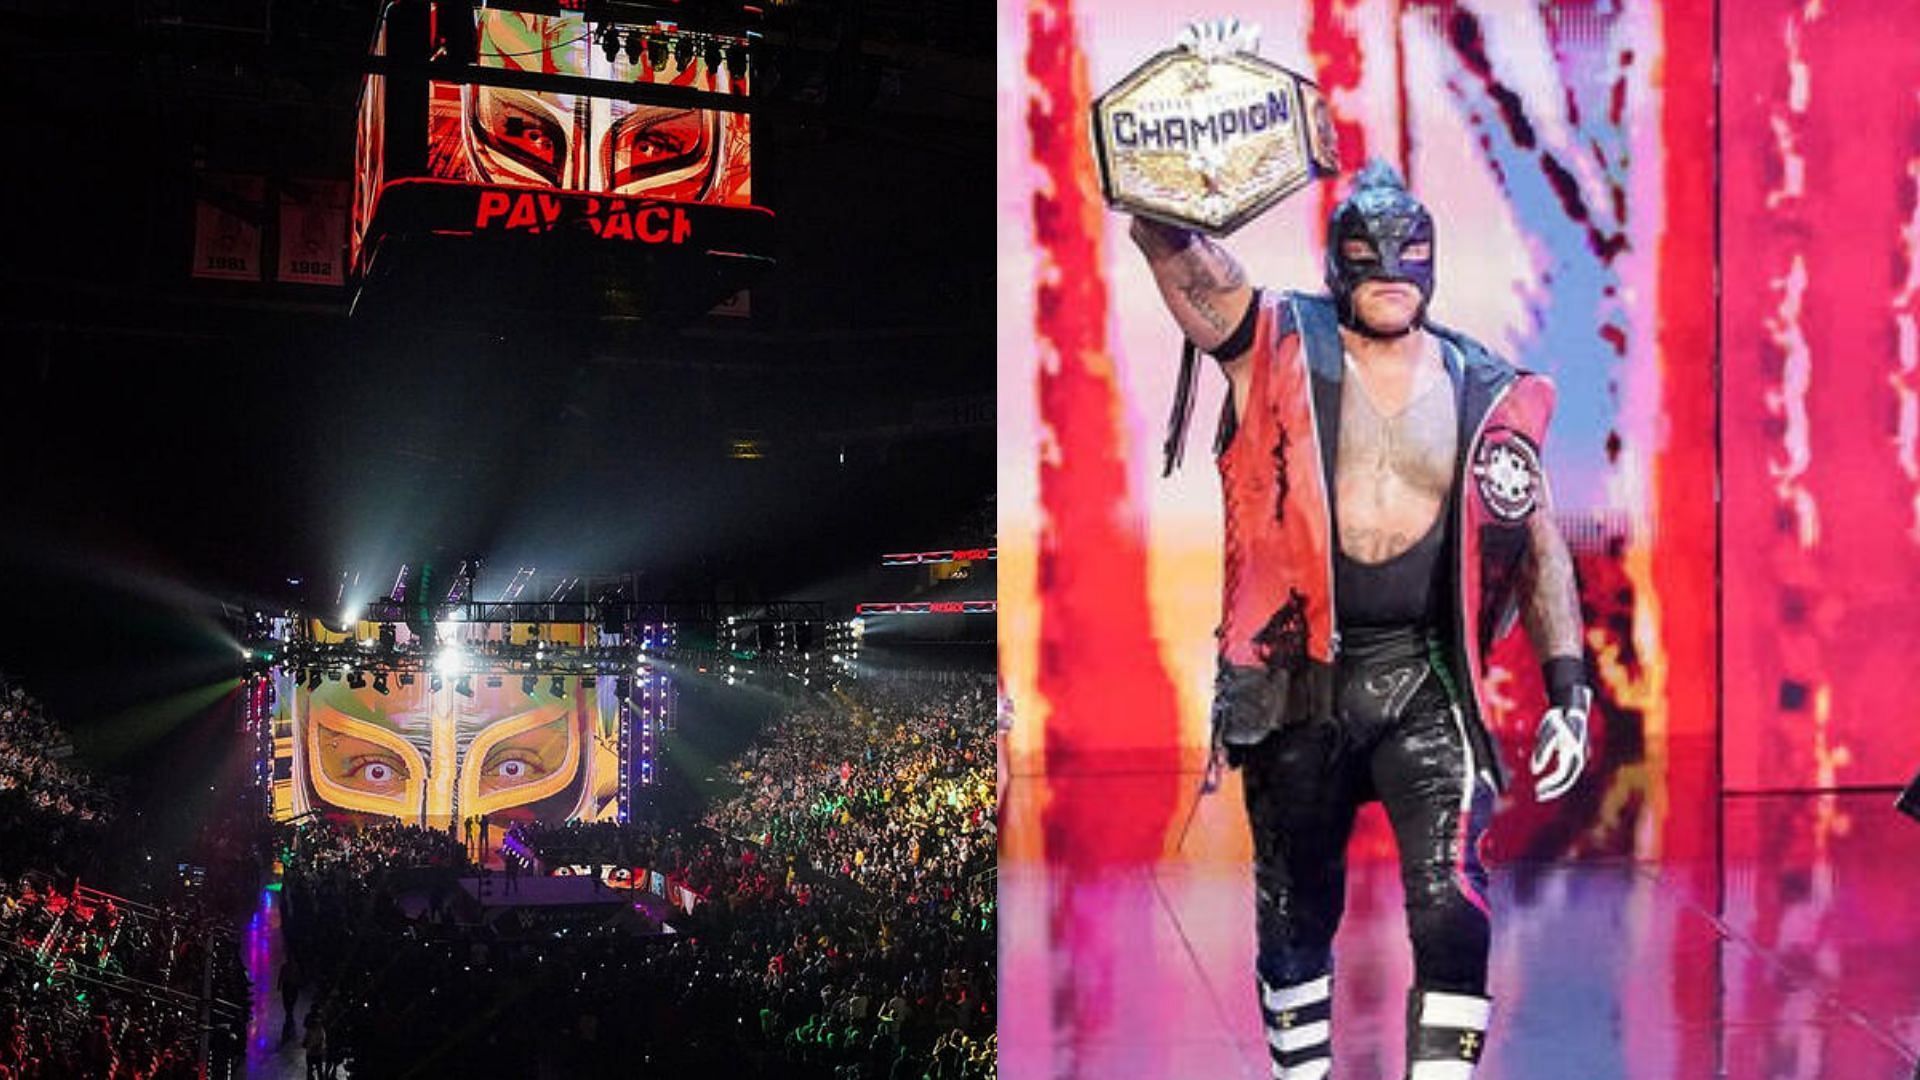 Rey Mysterio will return to action on SmackDown